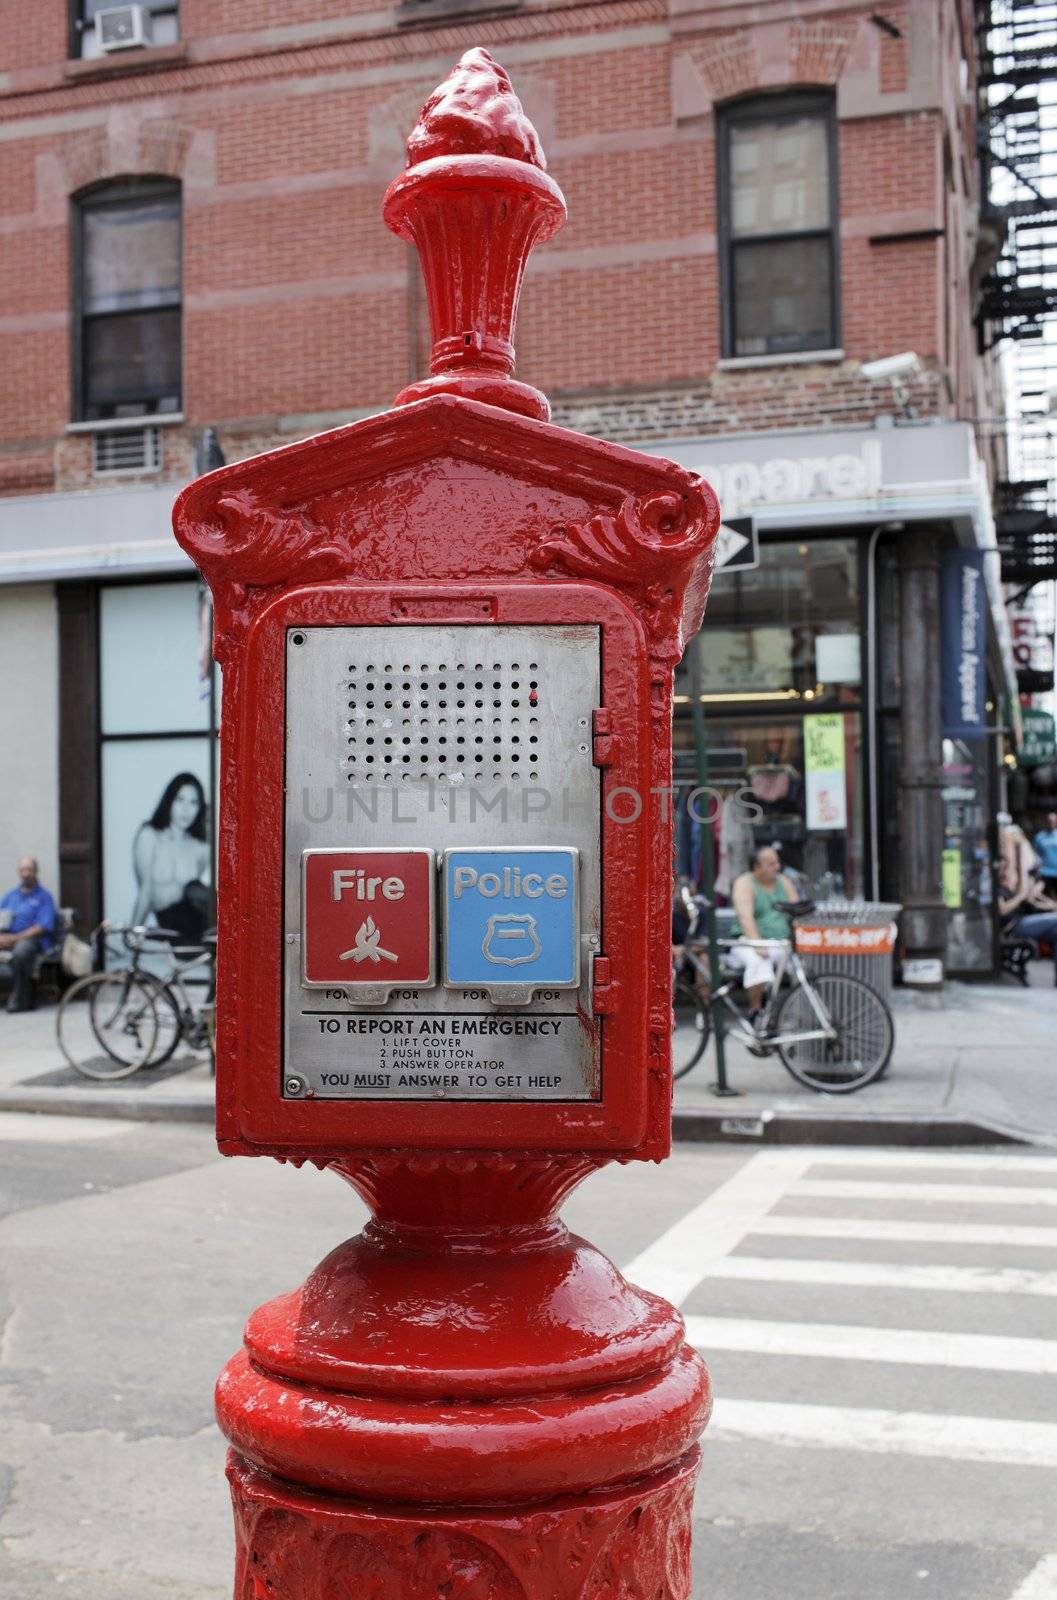 NEW YORK CITY, USA - JUNE 11: Emergency Reporting System (E.R.S.) box that is equipped with buttons to notify either the F.D.N.Y. or the N.Y.P.D. June 11, 2012 in New York City, USA